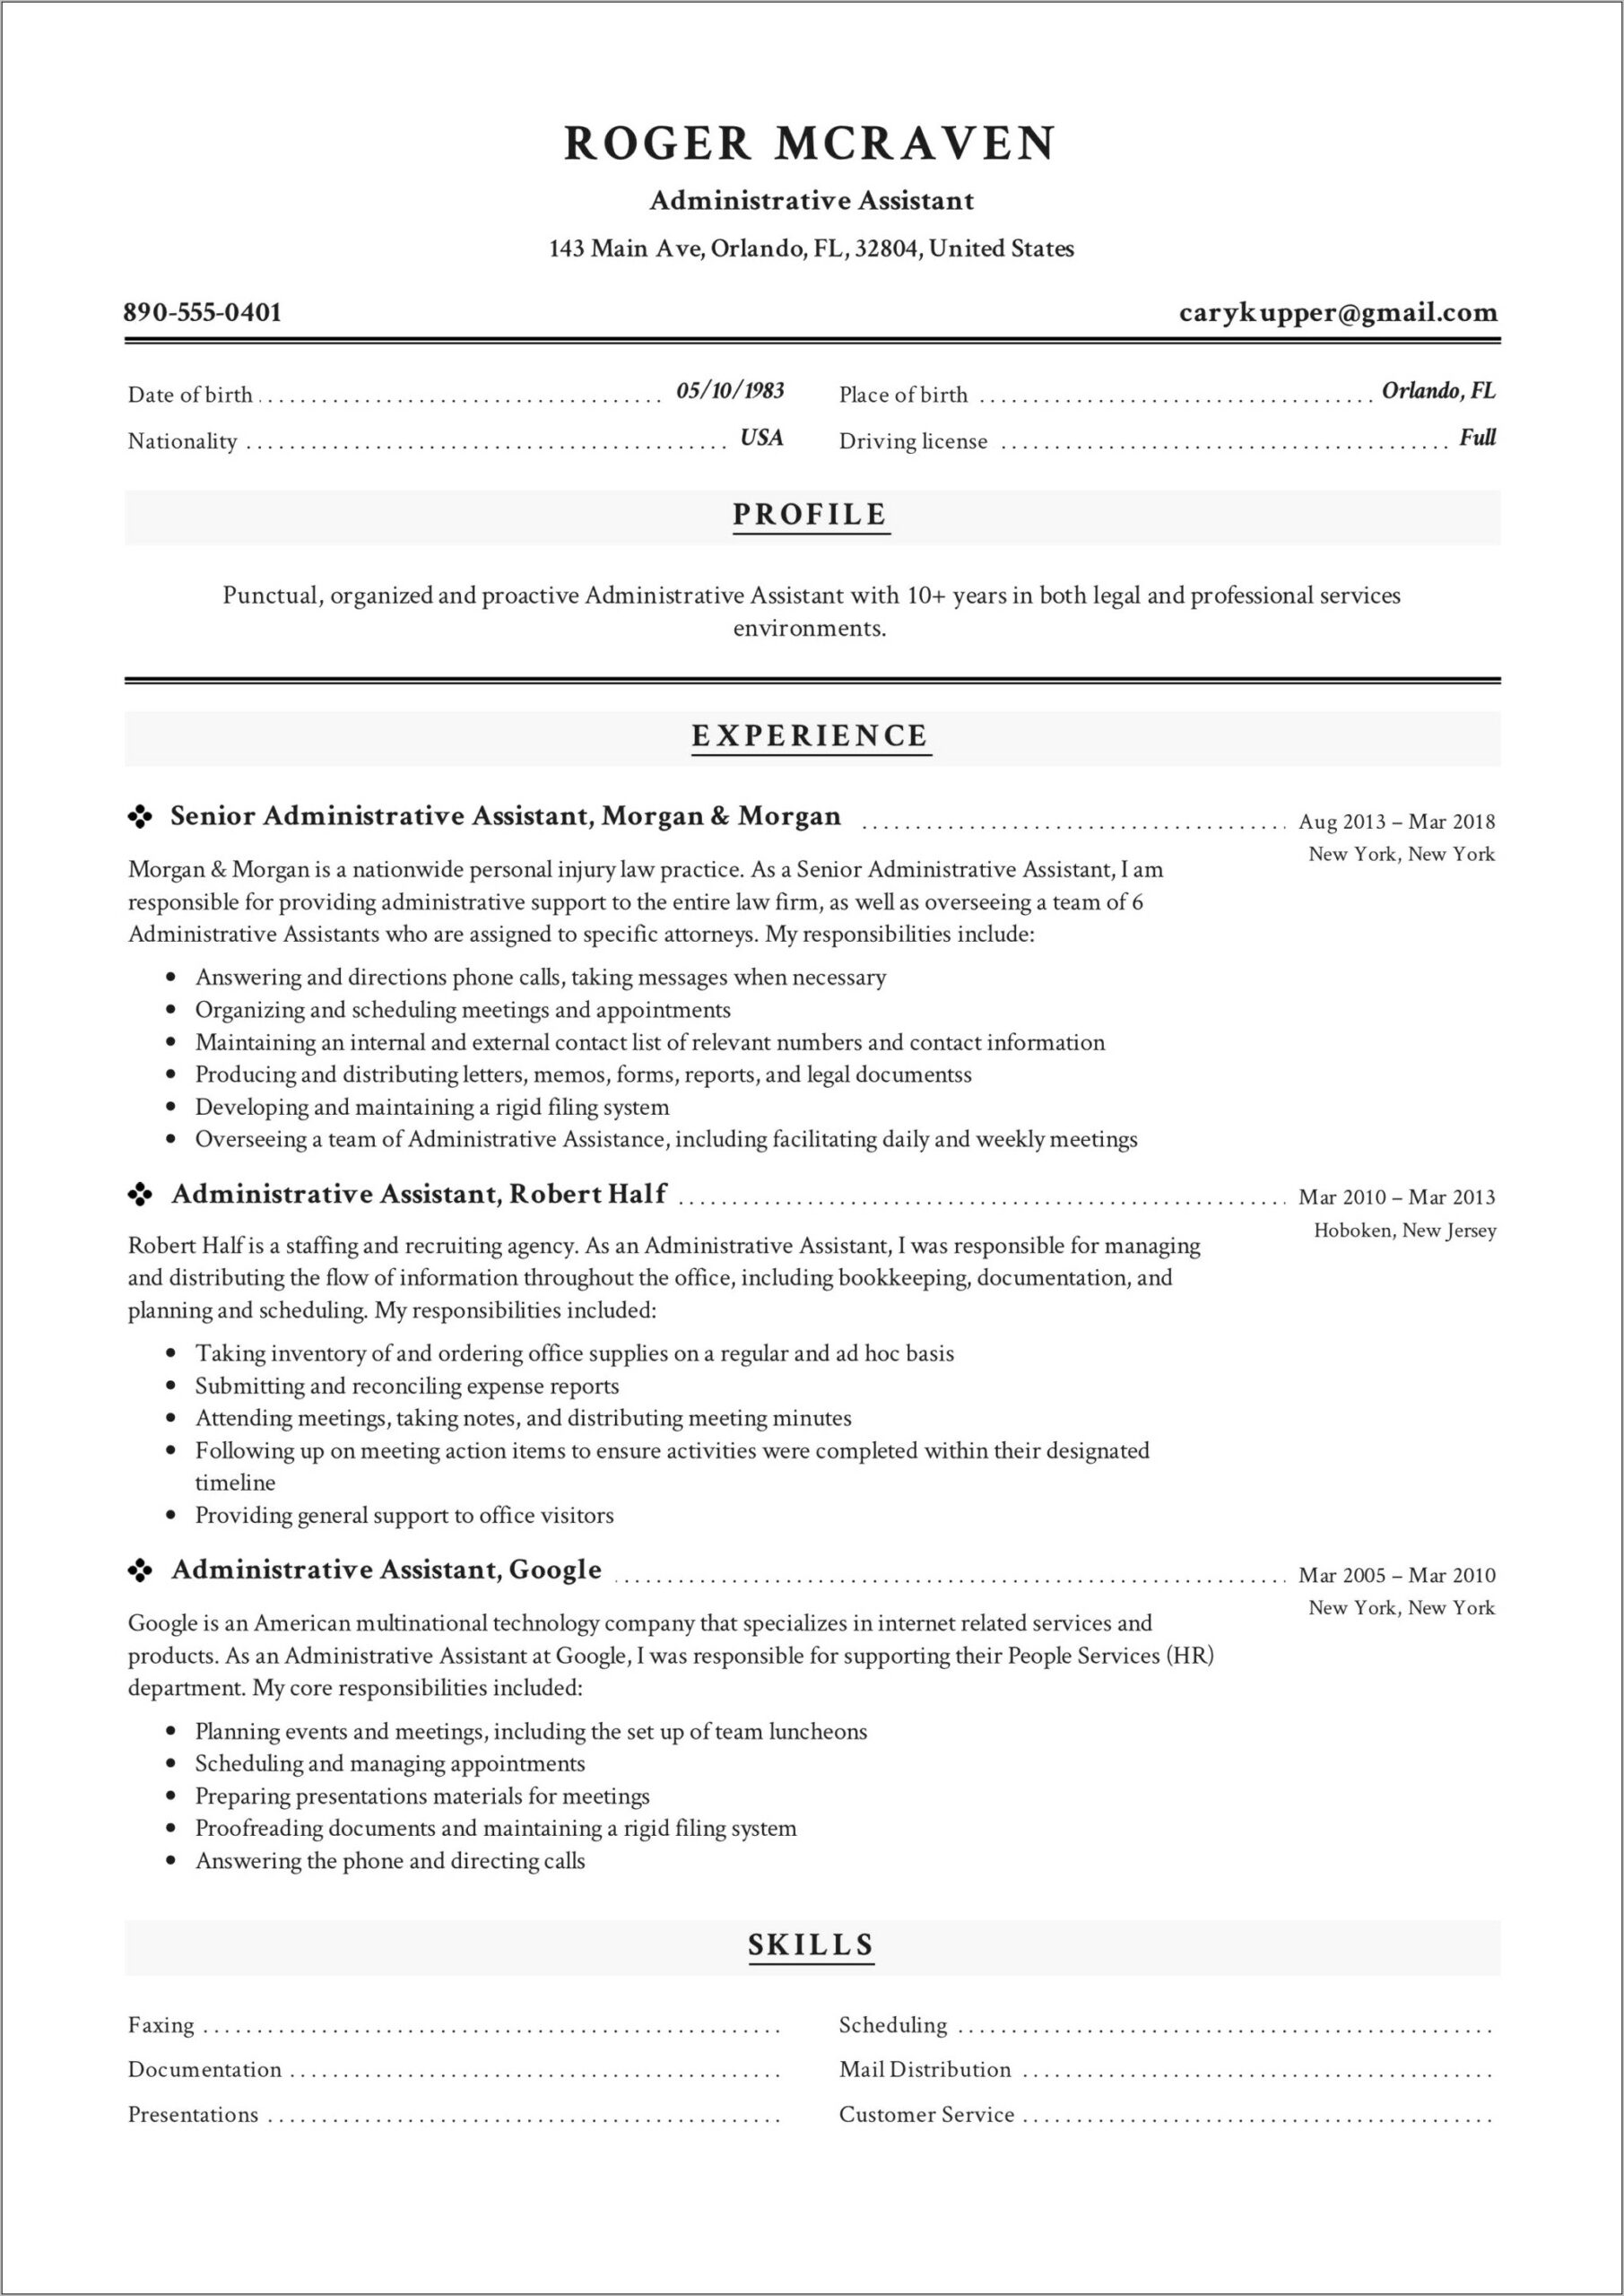 Admistrative Assistant Functional Resume Sample